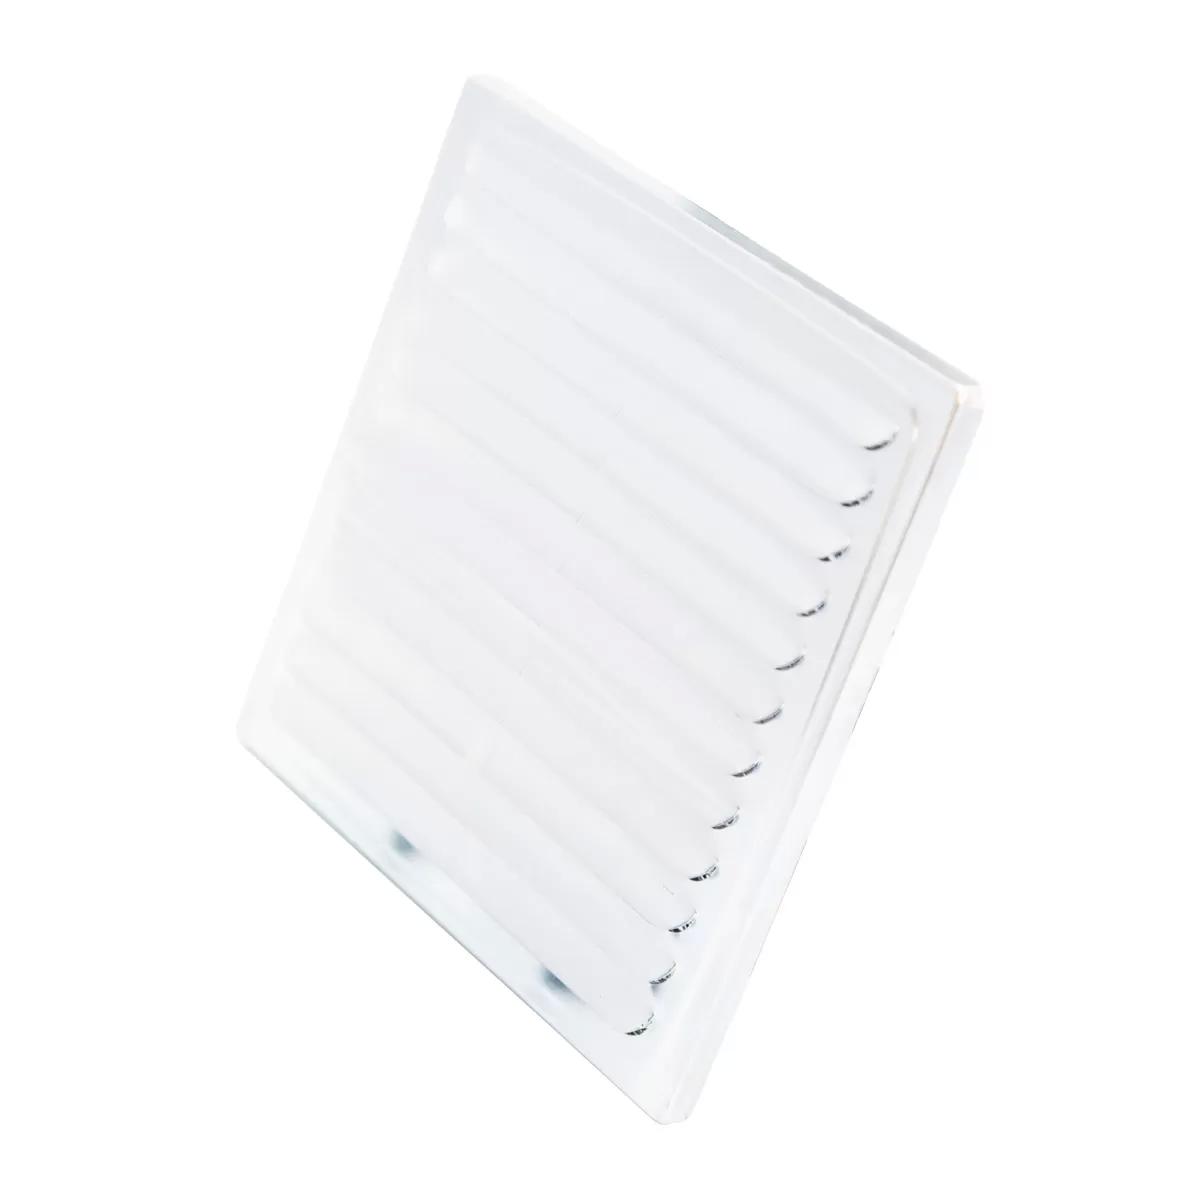 Ventilation grid, without extension, white ø100, 150x150mm 